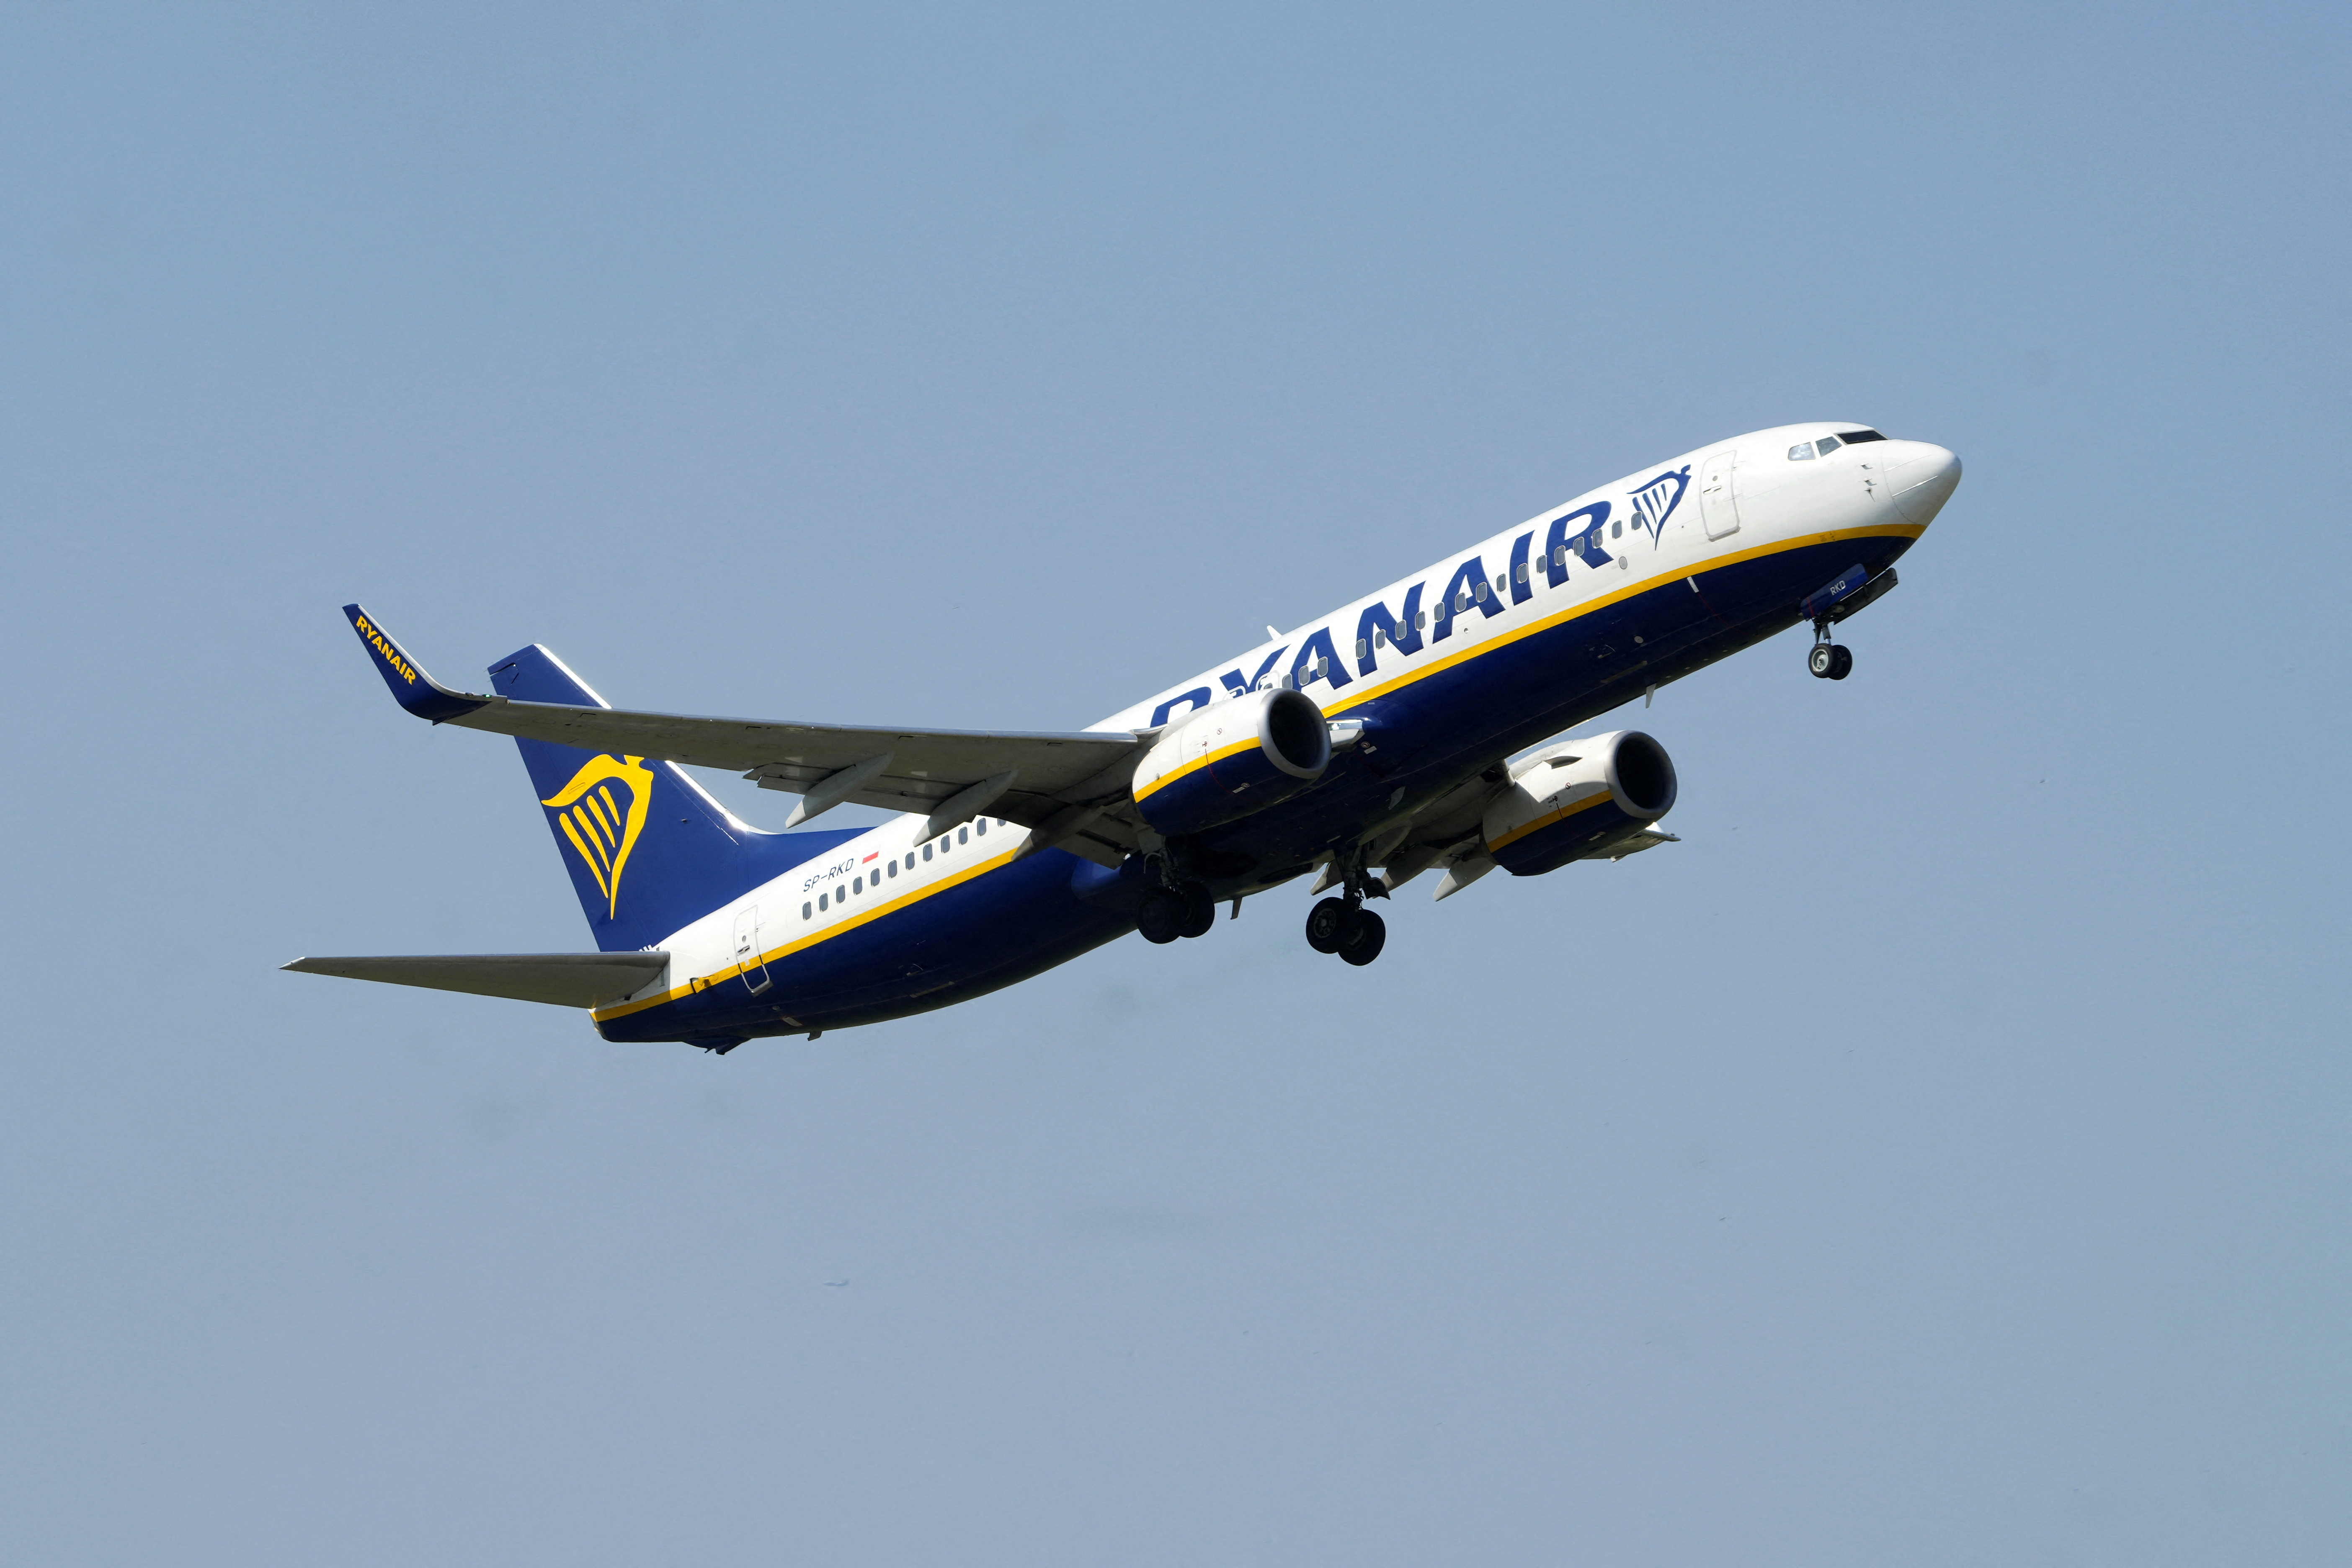 Ryanair aircraft Boeing 737-8AS takes off from Riga International Airport